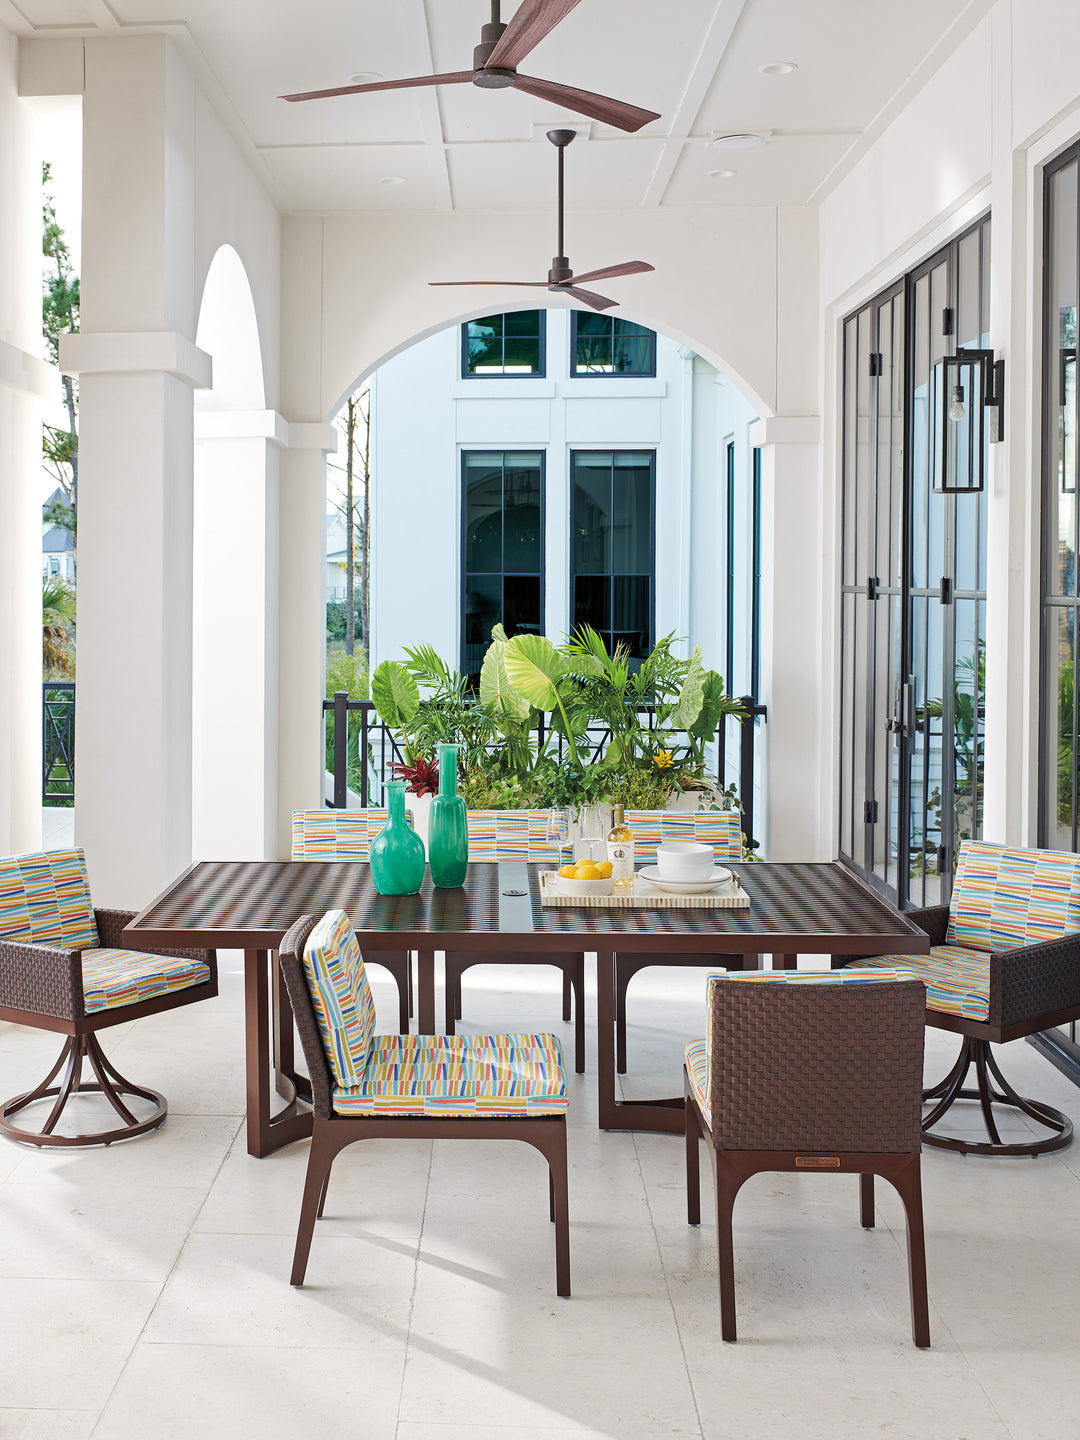 American Home Furniture | Tommy Bahama Outdoor  - Abaco Rectangular Dining Table